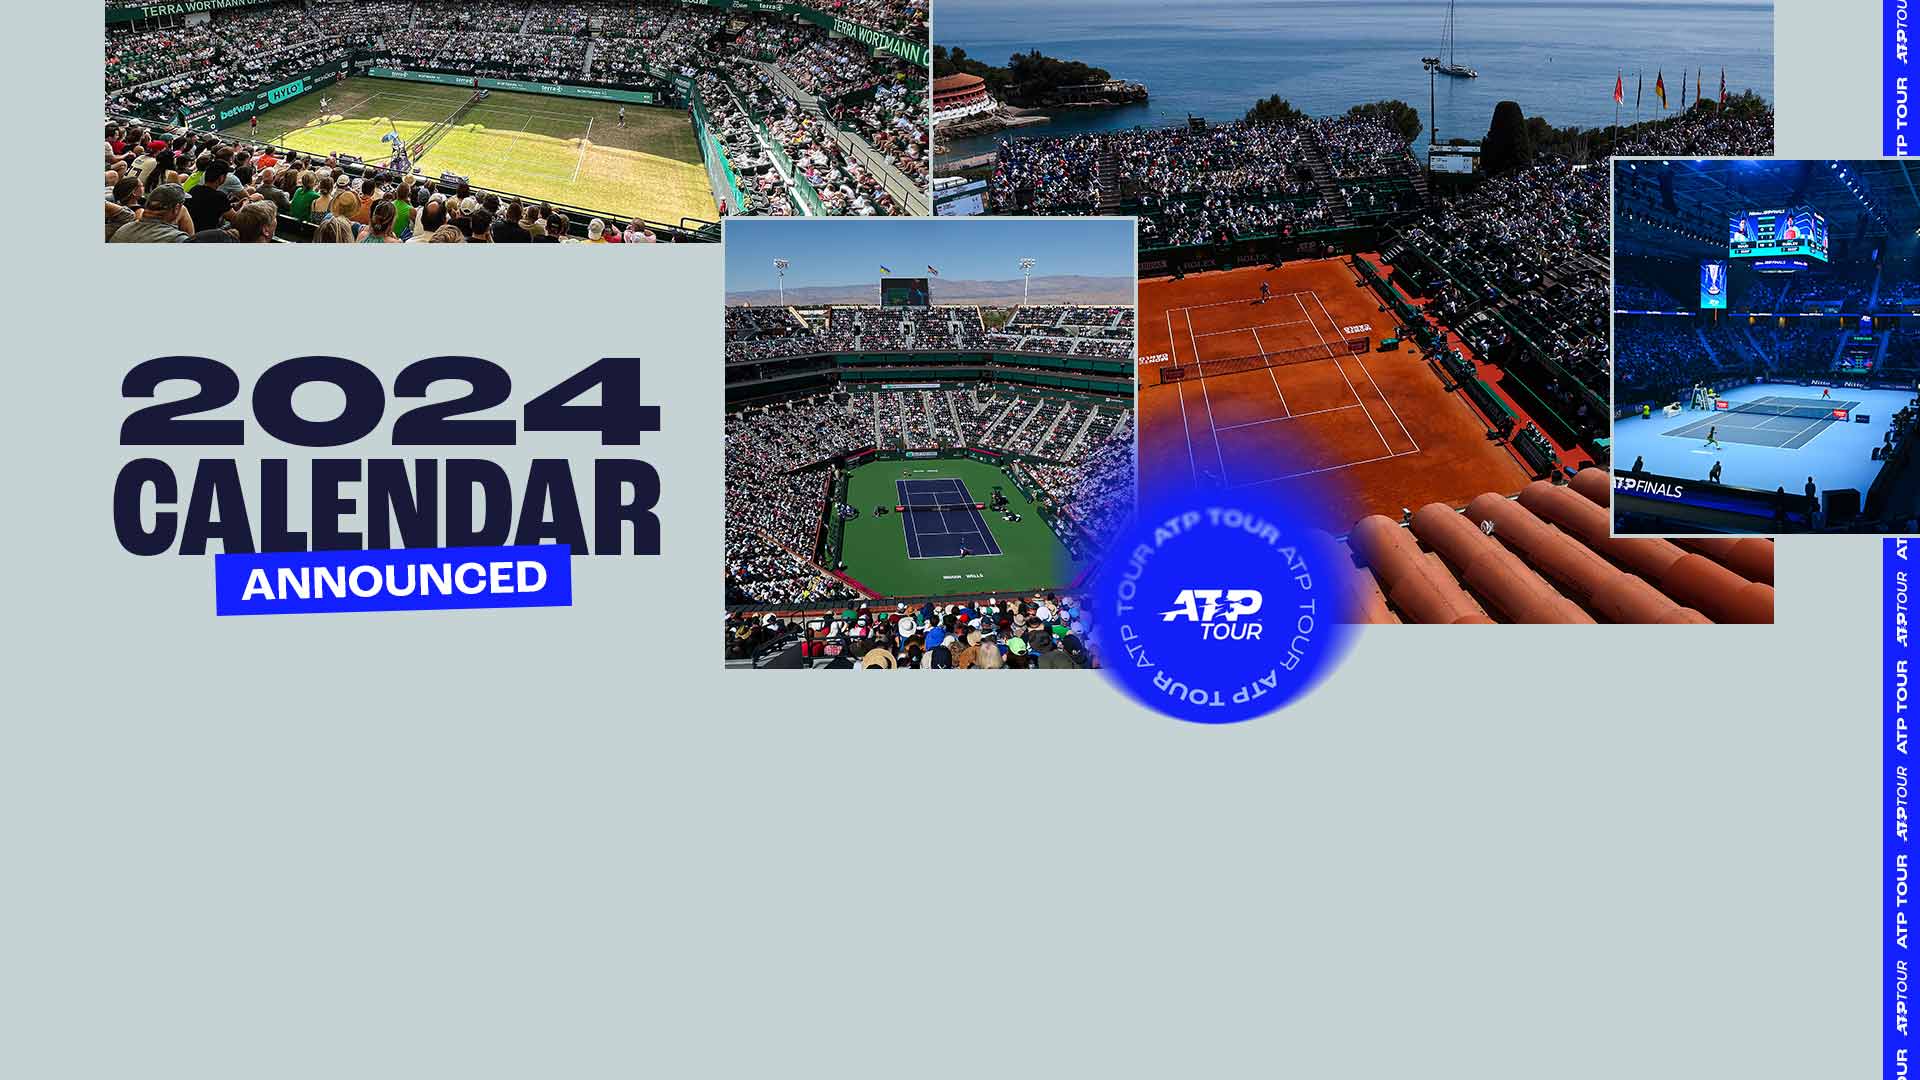 ATP announced 2024 calendar & combined events with WTA Tennis Forum